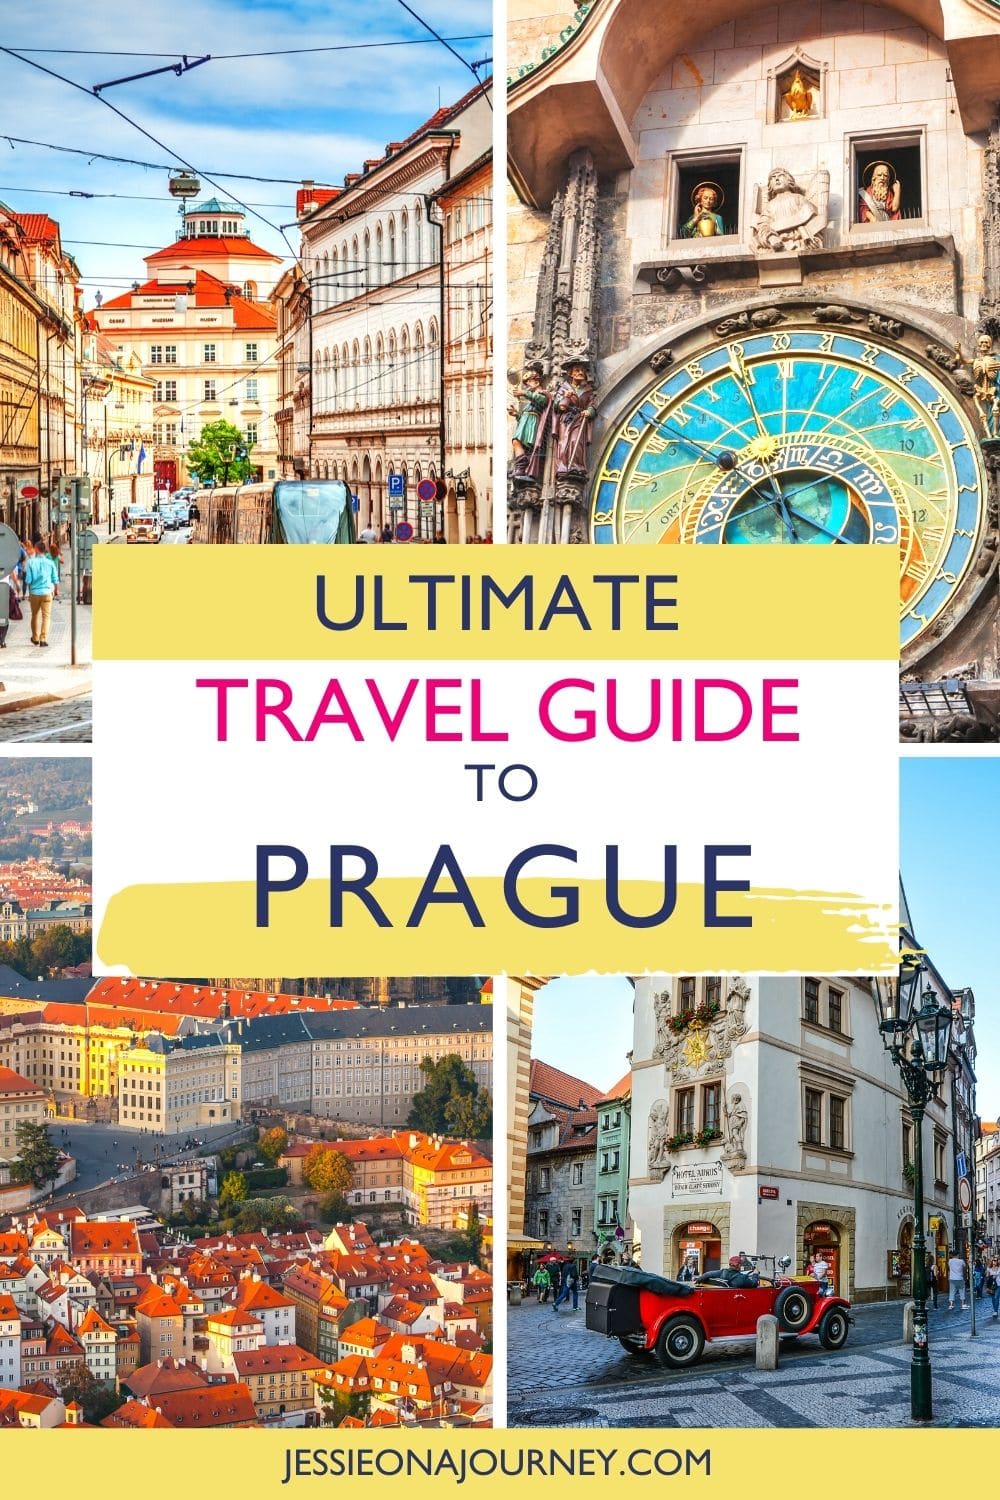 Solo Travel In Prague: How To Have An Amazing Trip On Your Own